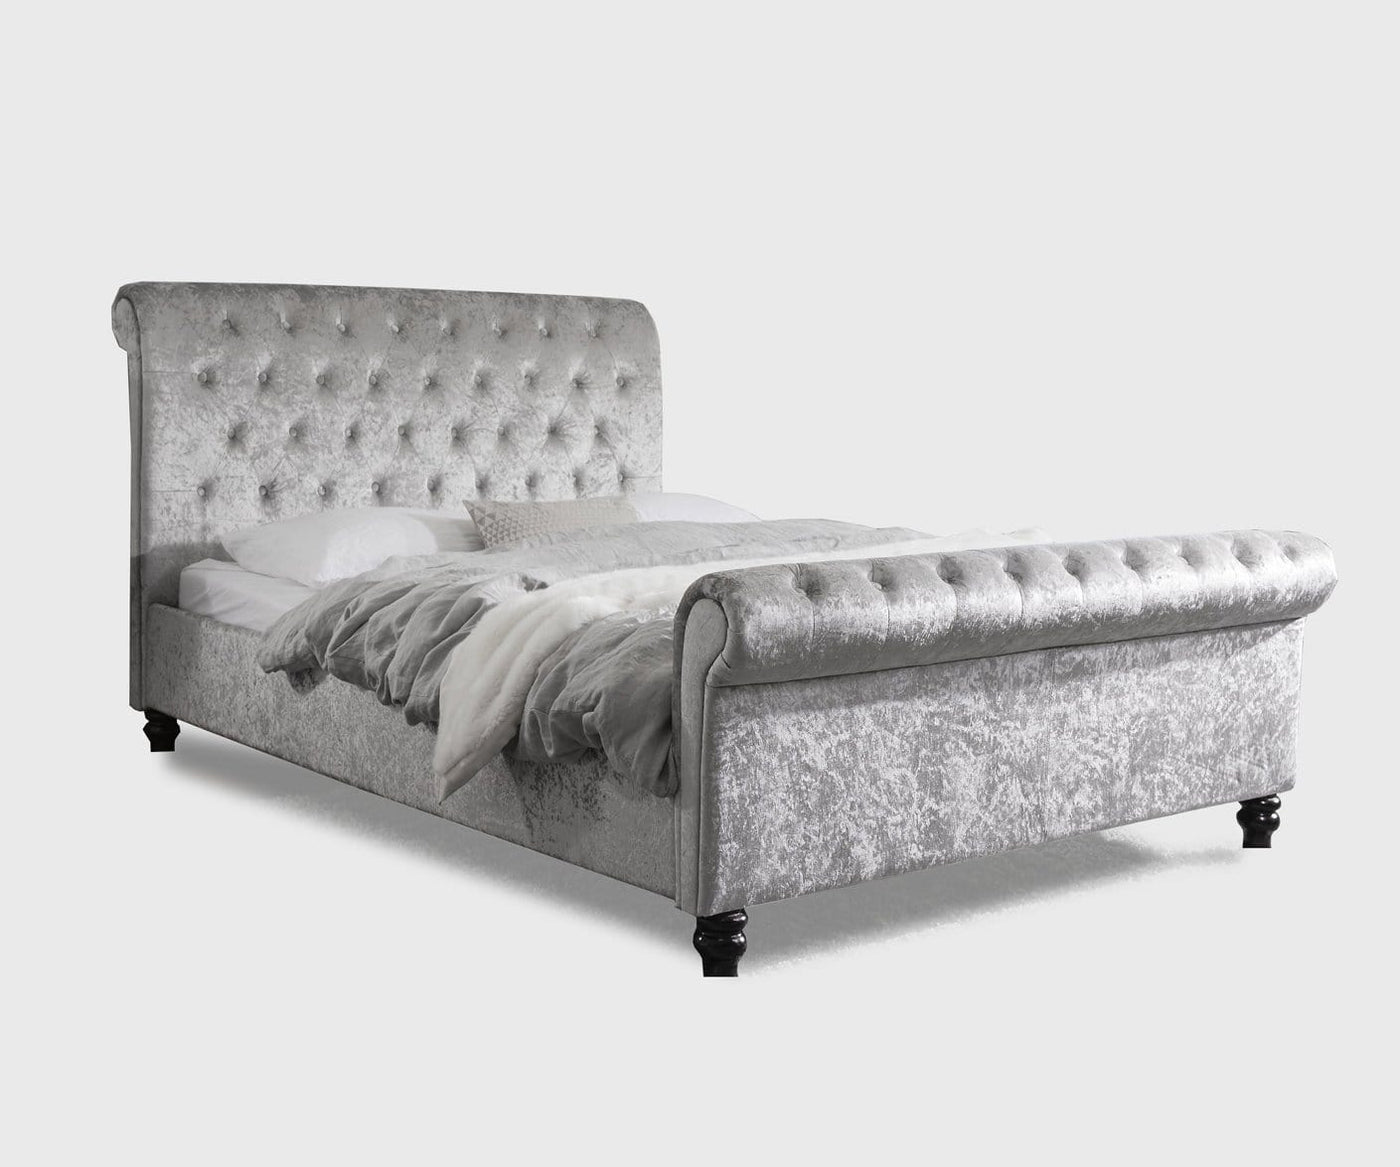 Silver lining Chesterfield Sleigh Scroll Bed Frame - Lorinzer Living